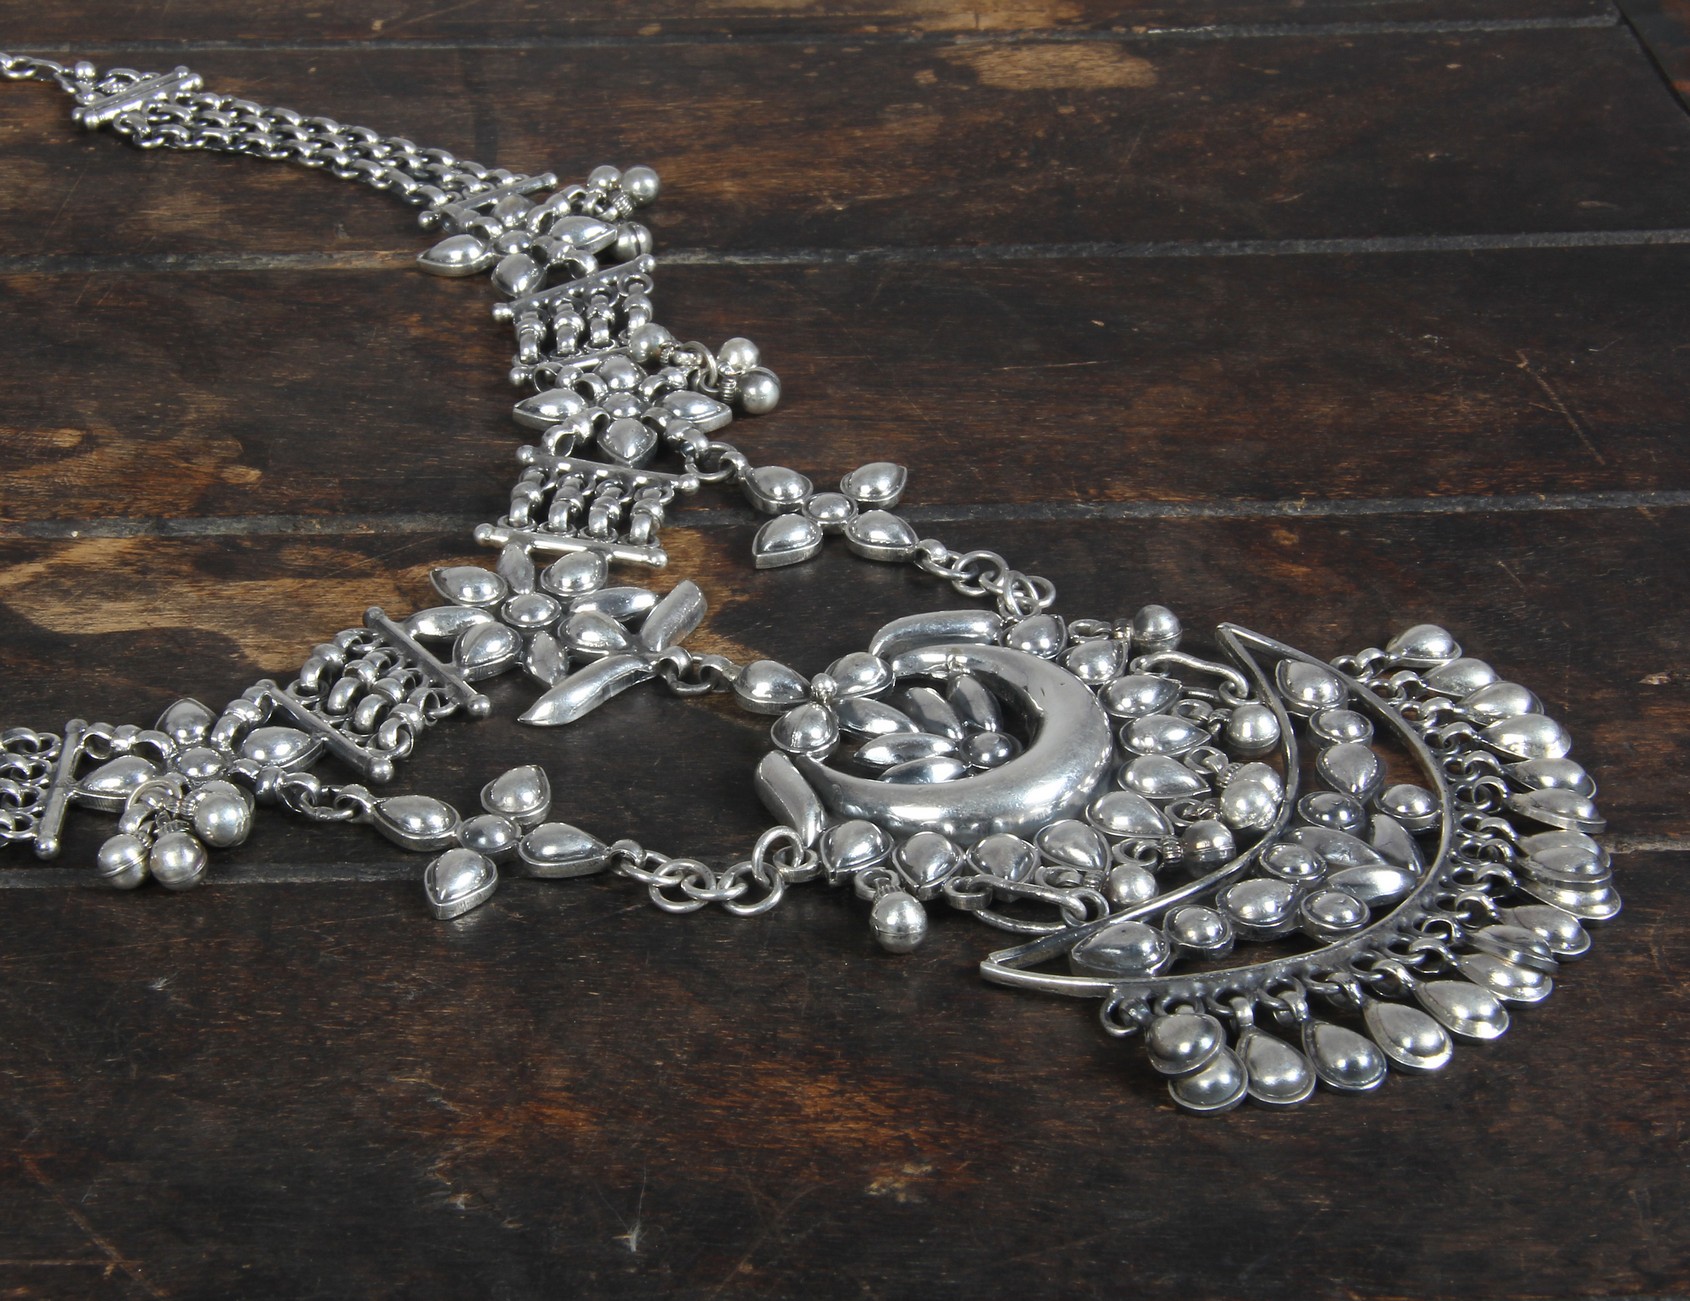 Women Antique Silver Necklace Set in Gujrati Style NK-31 - Jewelry ...